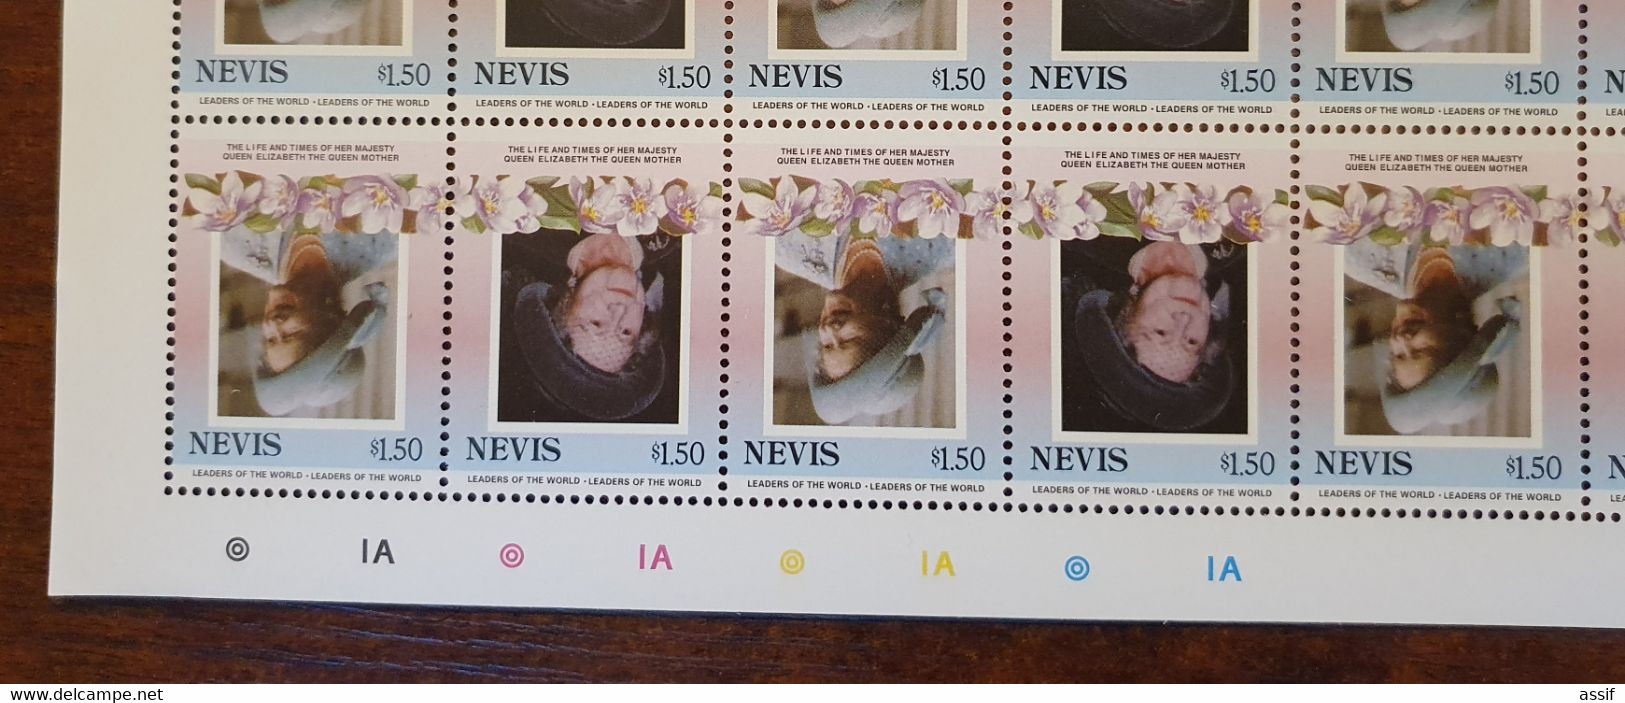 NEVIS 1,50$ 1985 FEUILLE ENTIERE CENTRE RENVERSE SHEET INVERTED YT 317 Et 318 50 TIMBRES NEUFS ** /FREE SHIPPING R - St.Kitts Und Nevis ( 1983-...)